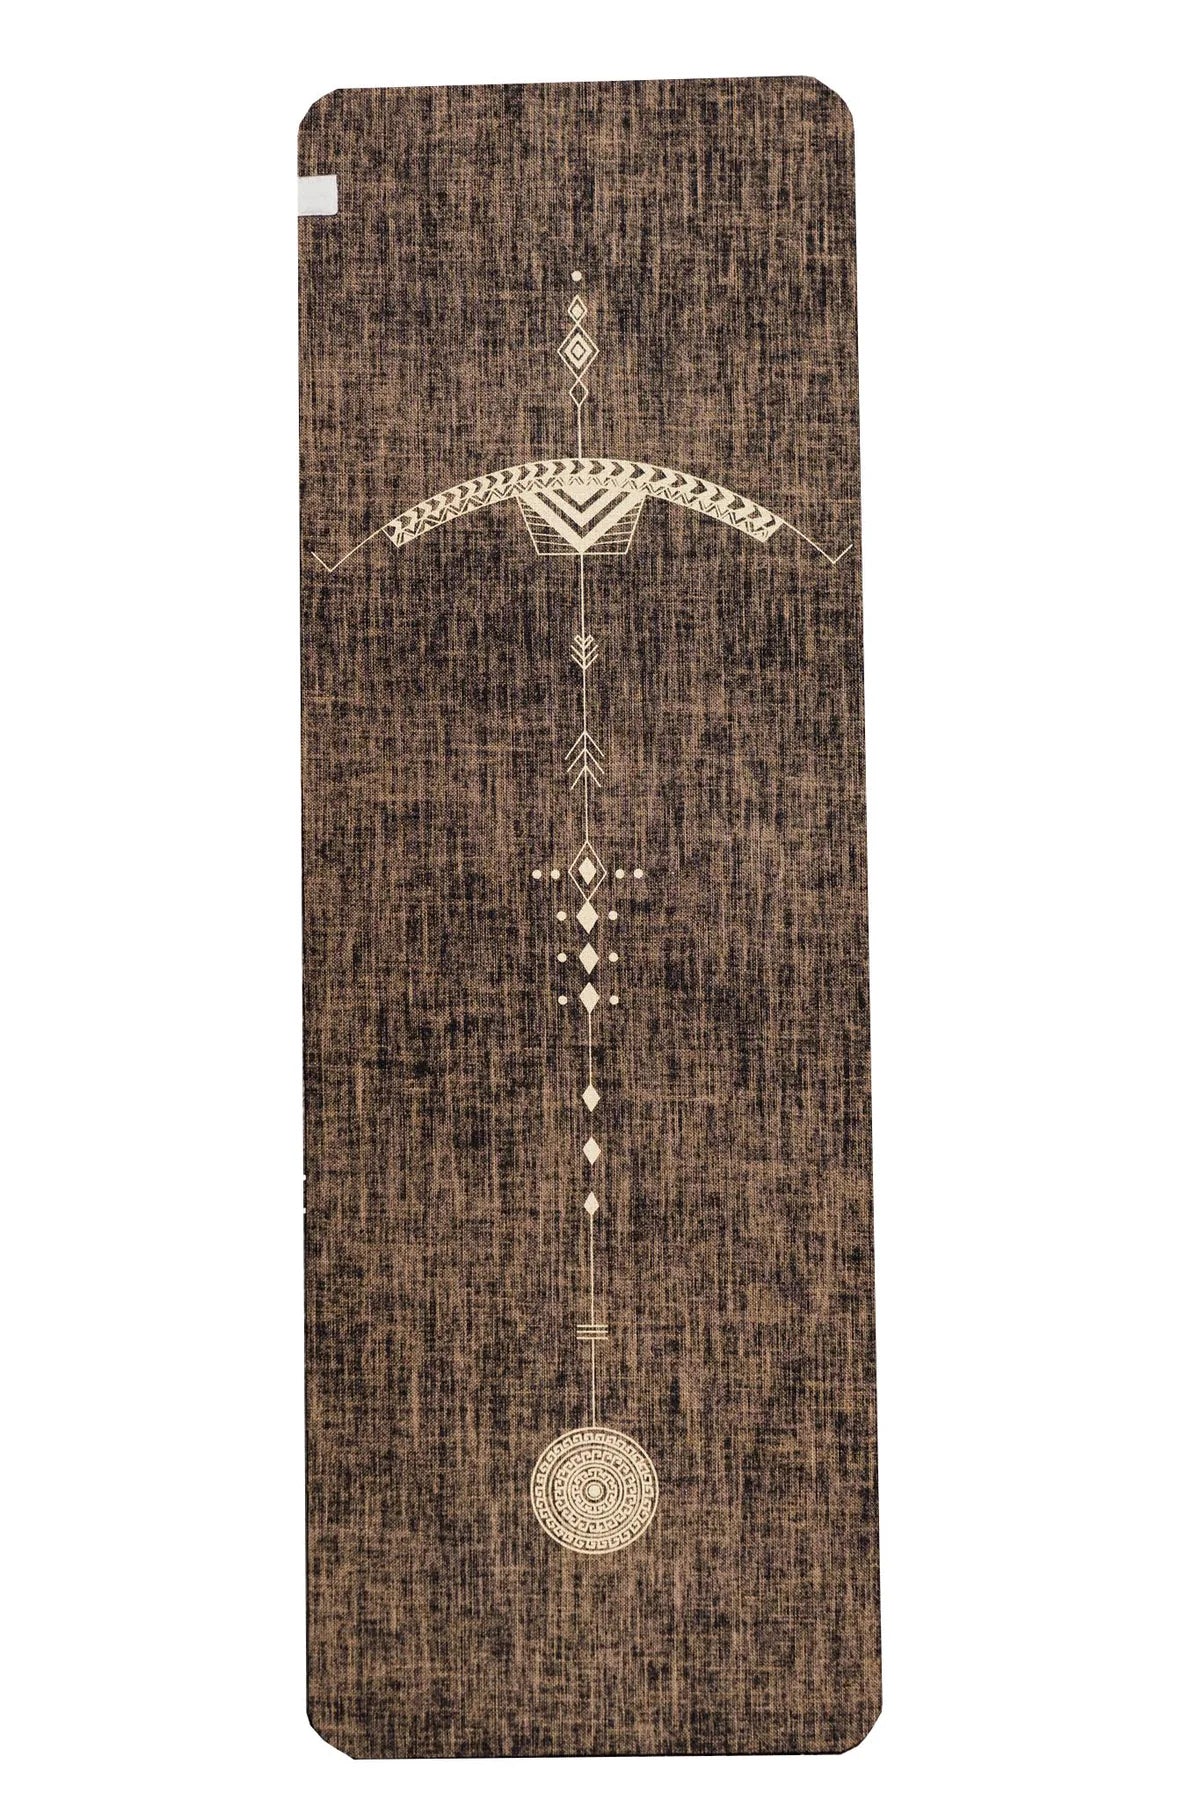 *Yoga Tribe - Bow and Arrow Design Printed on black coloured PER and Organic Jute Yoga Mat.